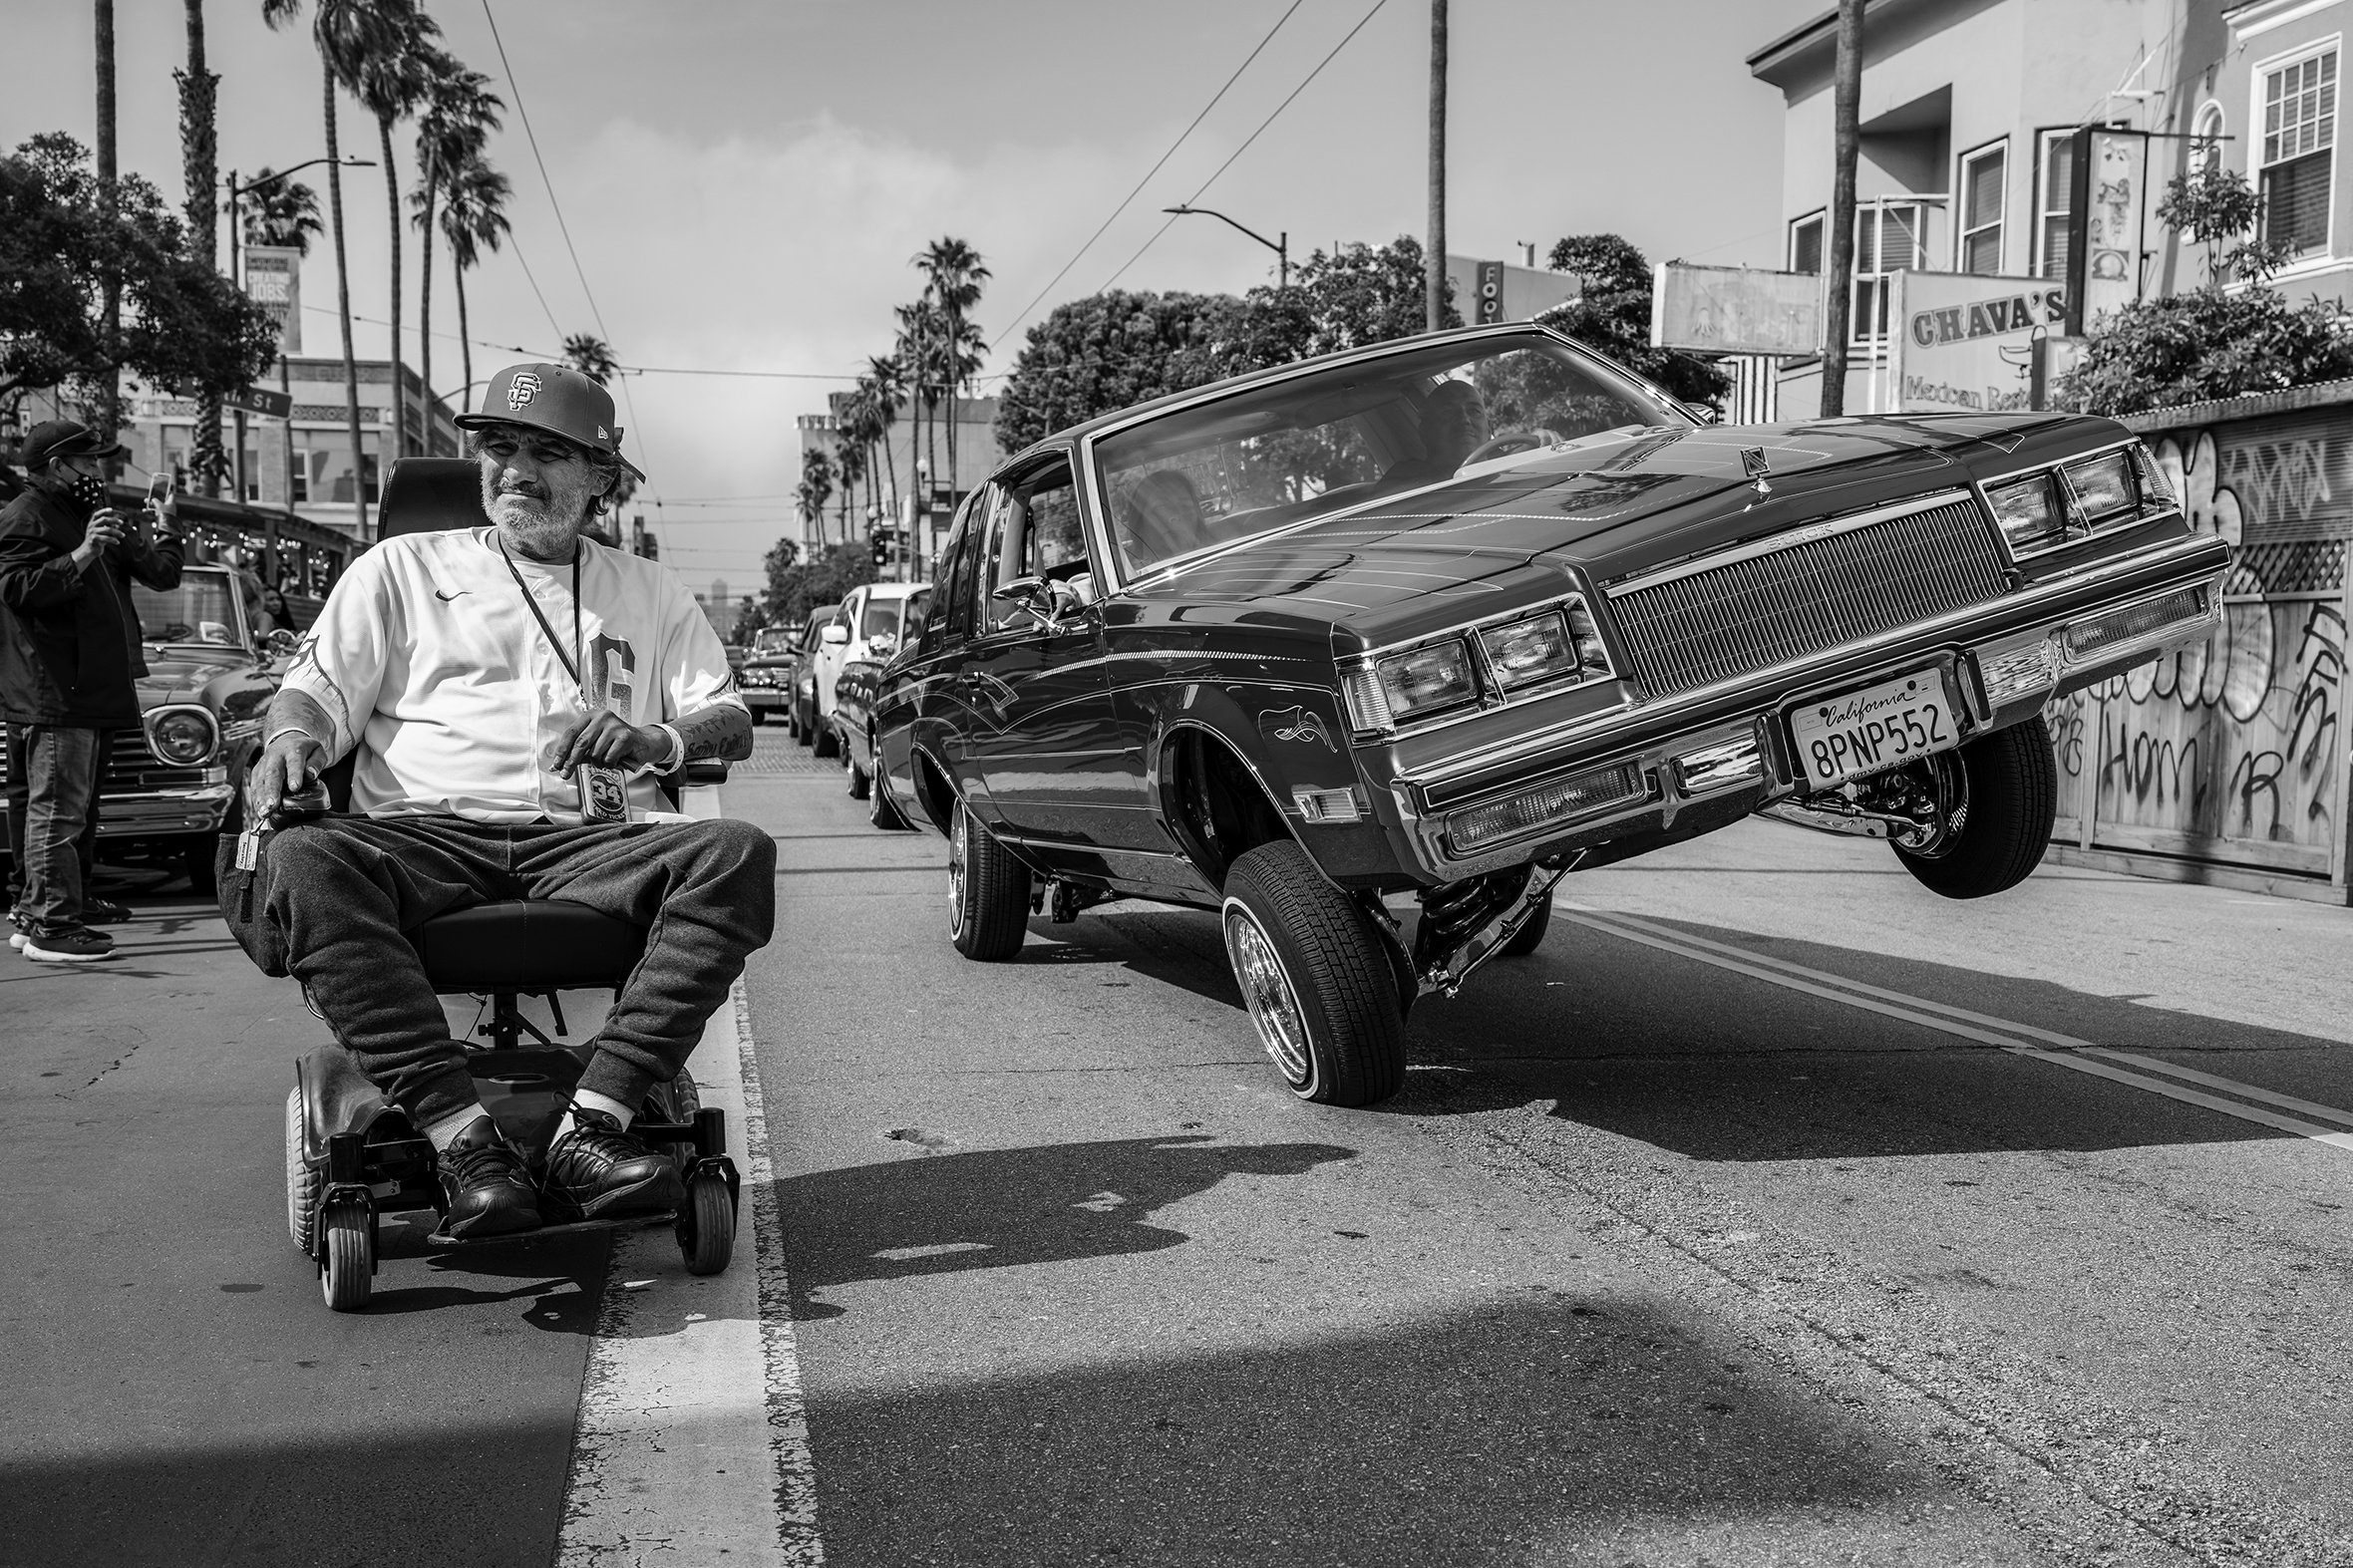 A man in a San Francisco cap sits in a power chair along the edge-line marking of a street and very close to a car balanced on its right two wheels during a Cinco de Mayo celebration organized by the San Francisco Lowrider Council.